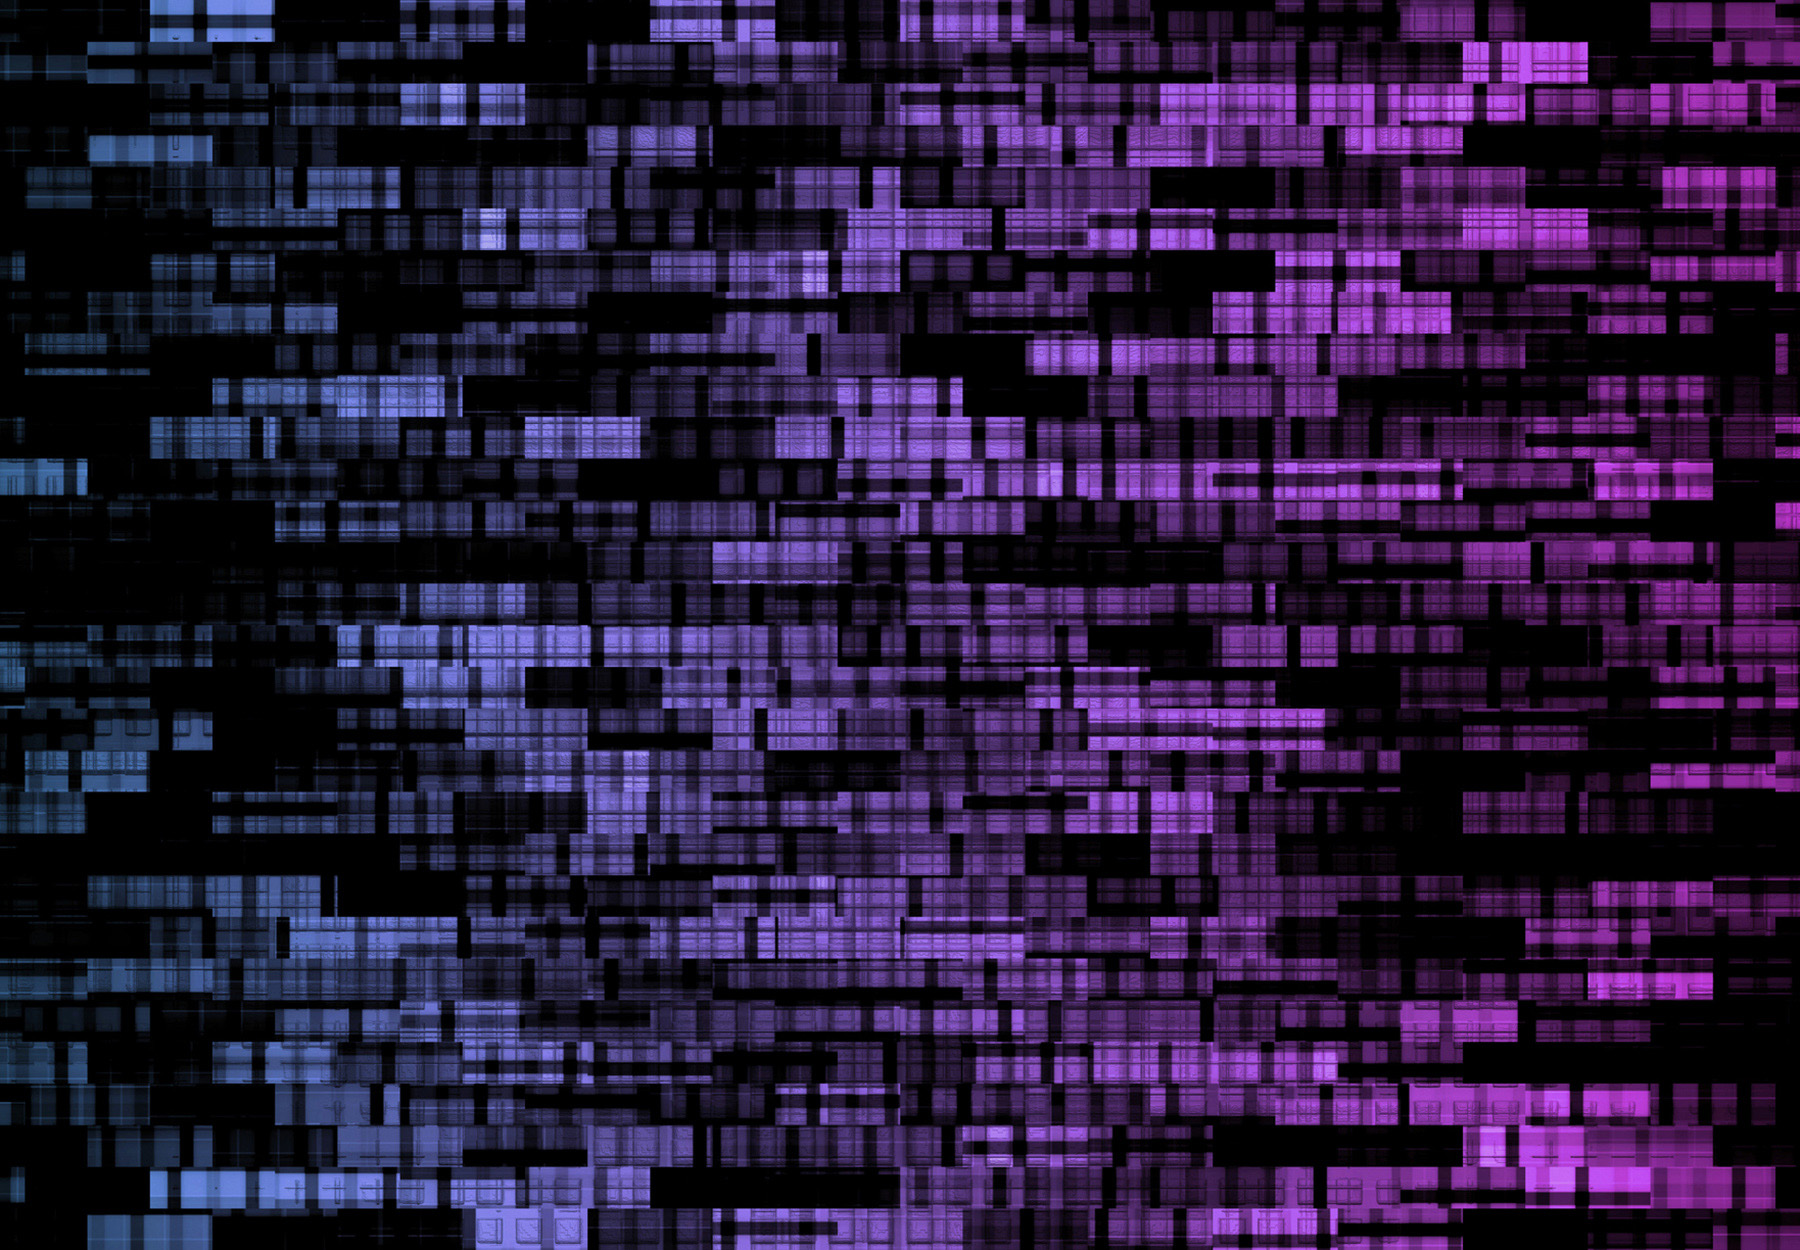 Abstract genetic data image to show next-generation sequencing